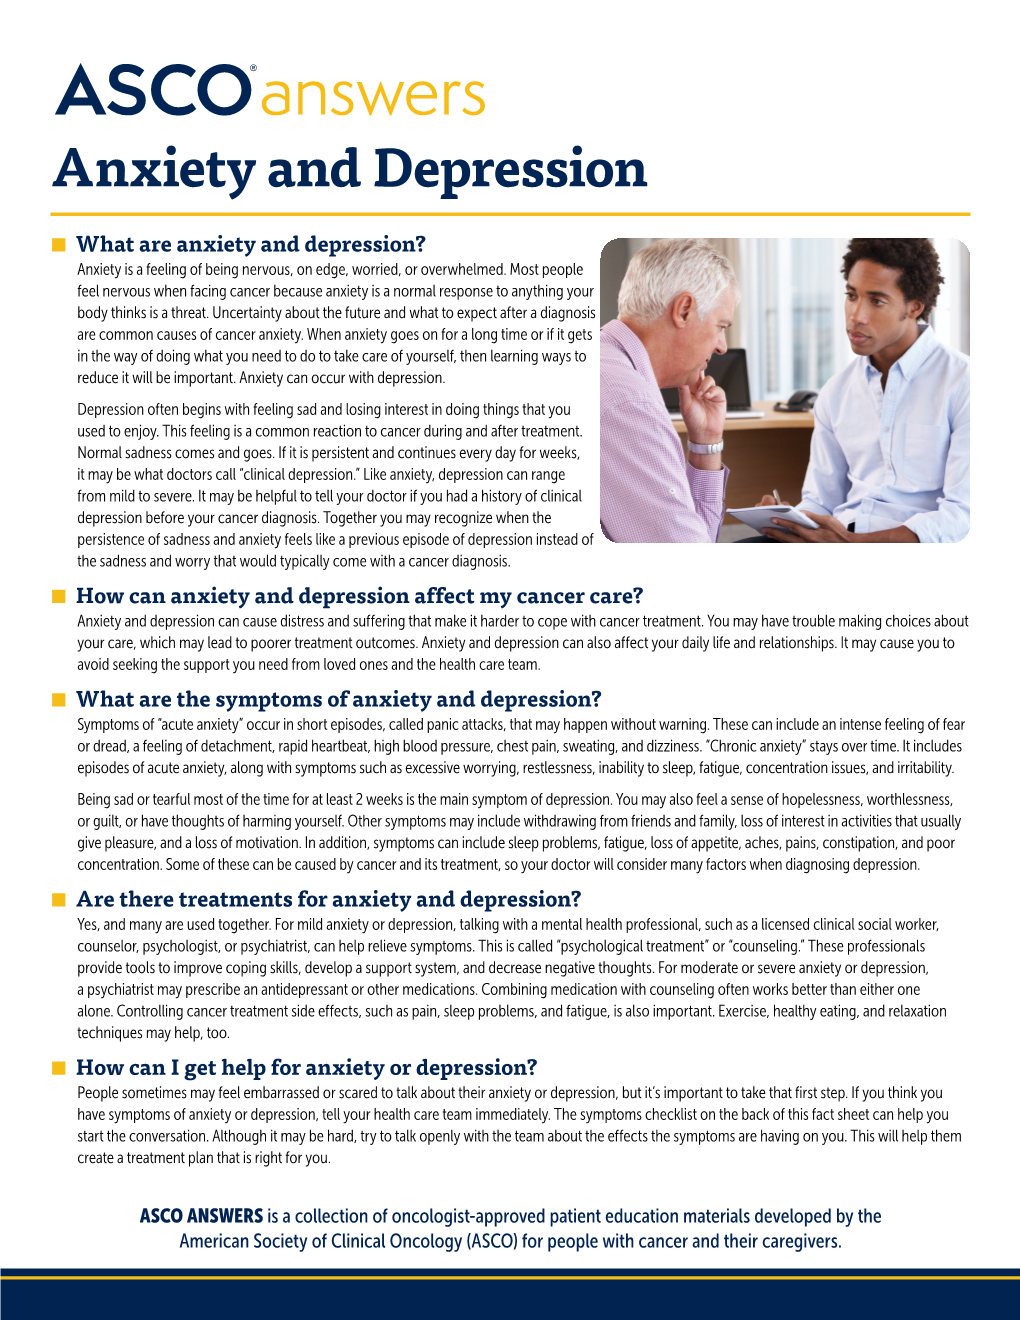 ASCO Answers: Anxiety and Depression